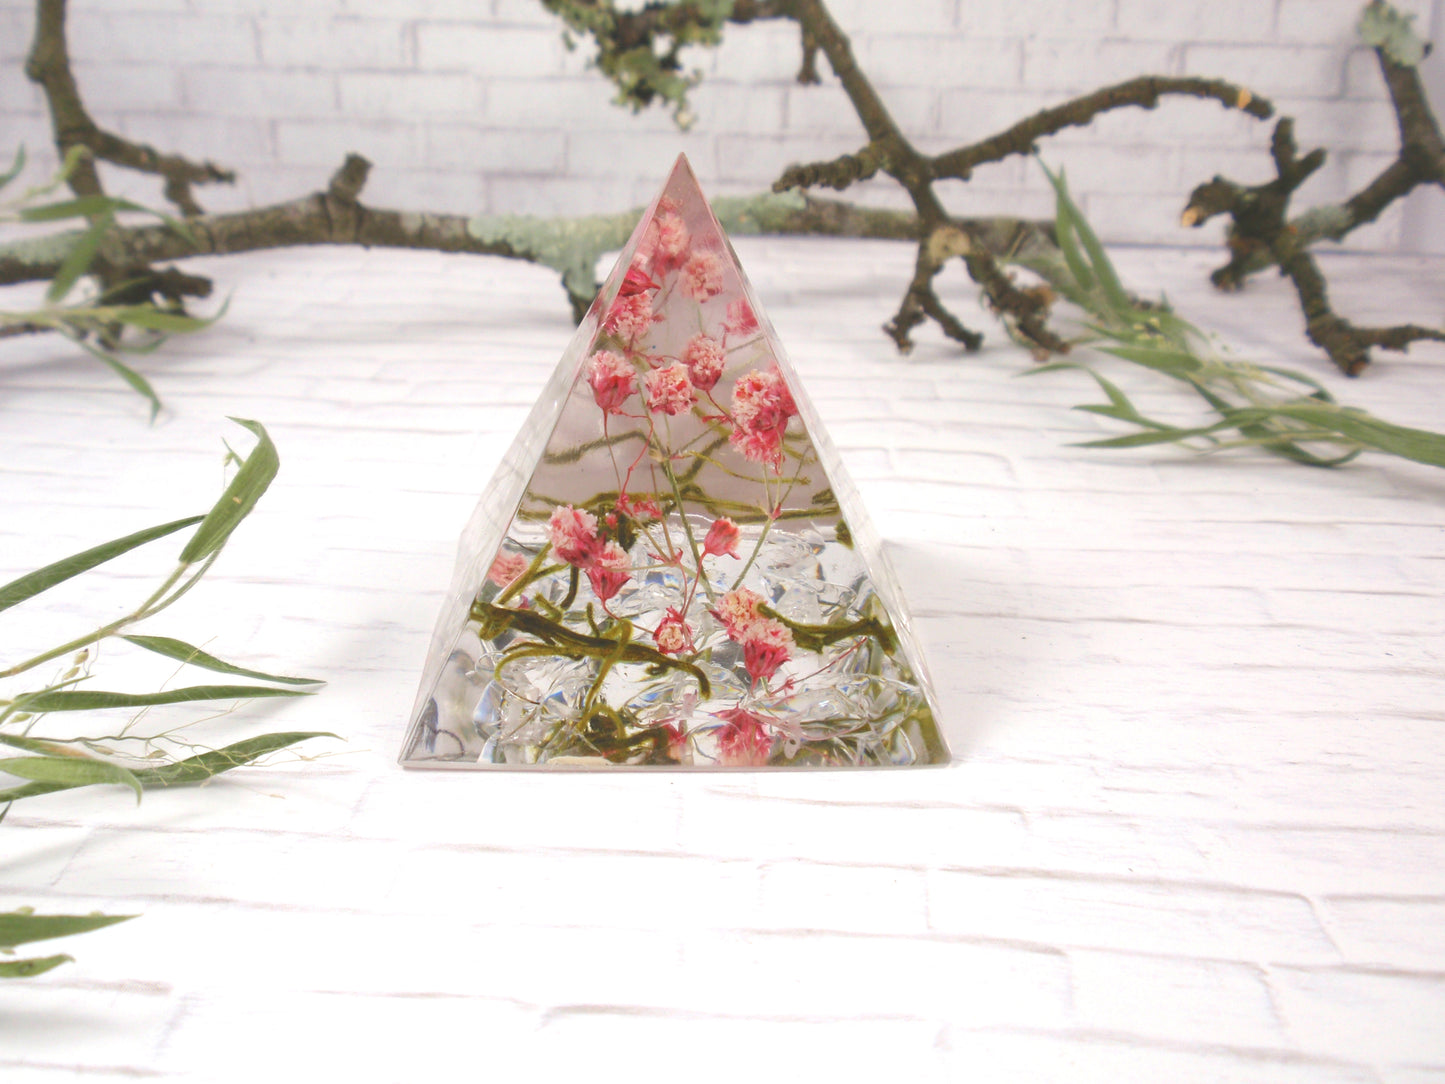 resin pyramid with flowers